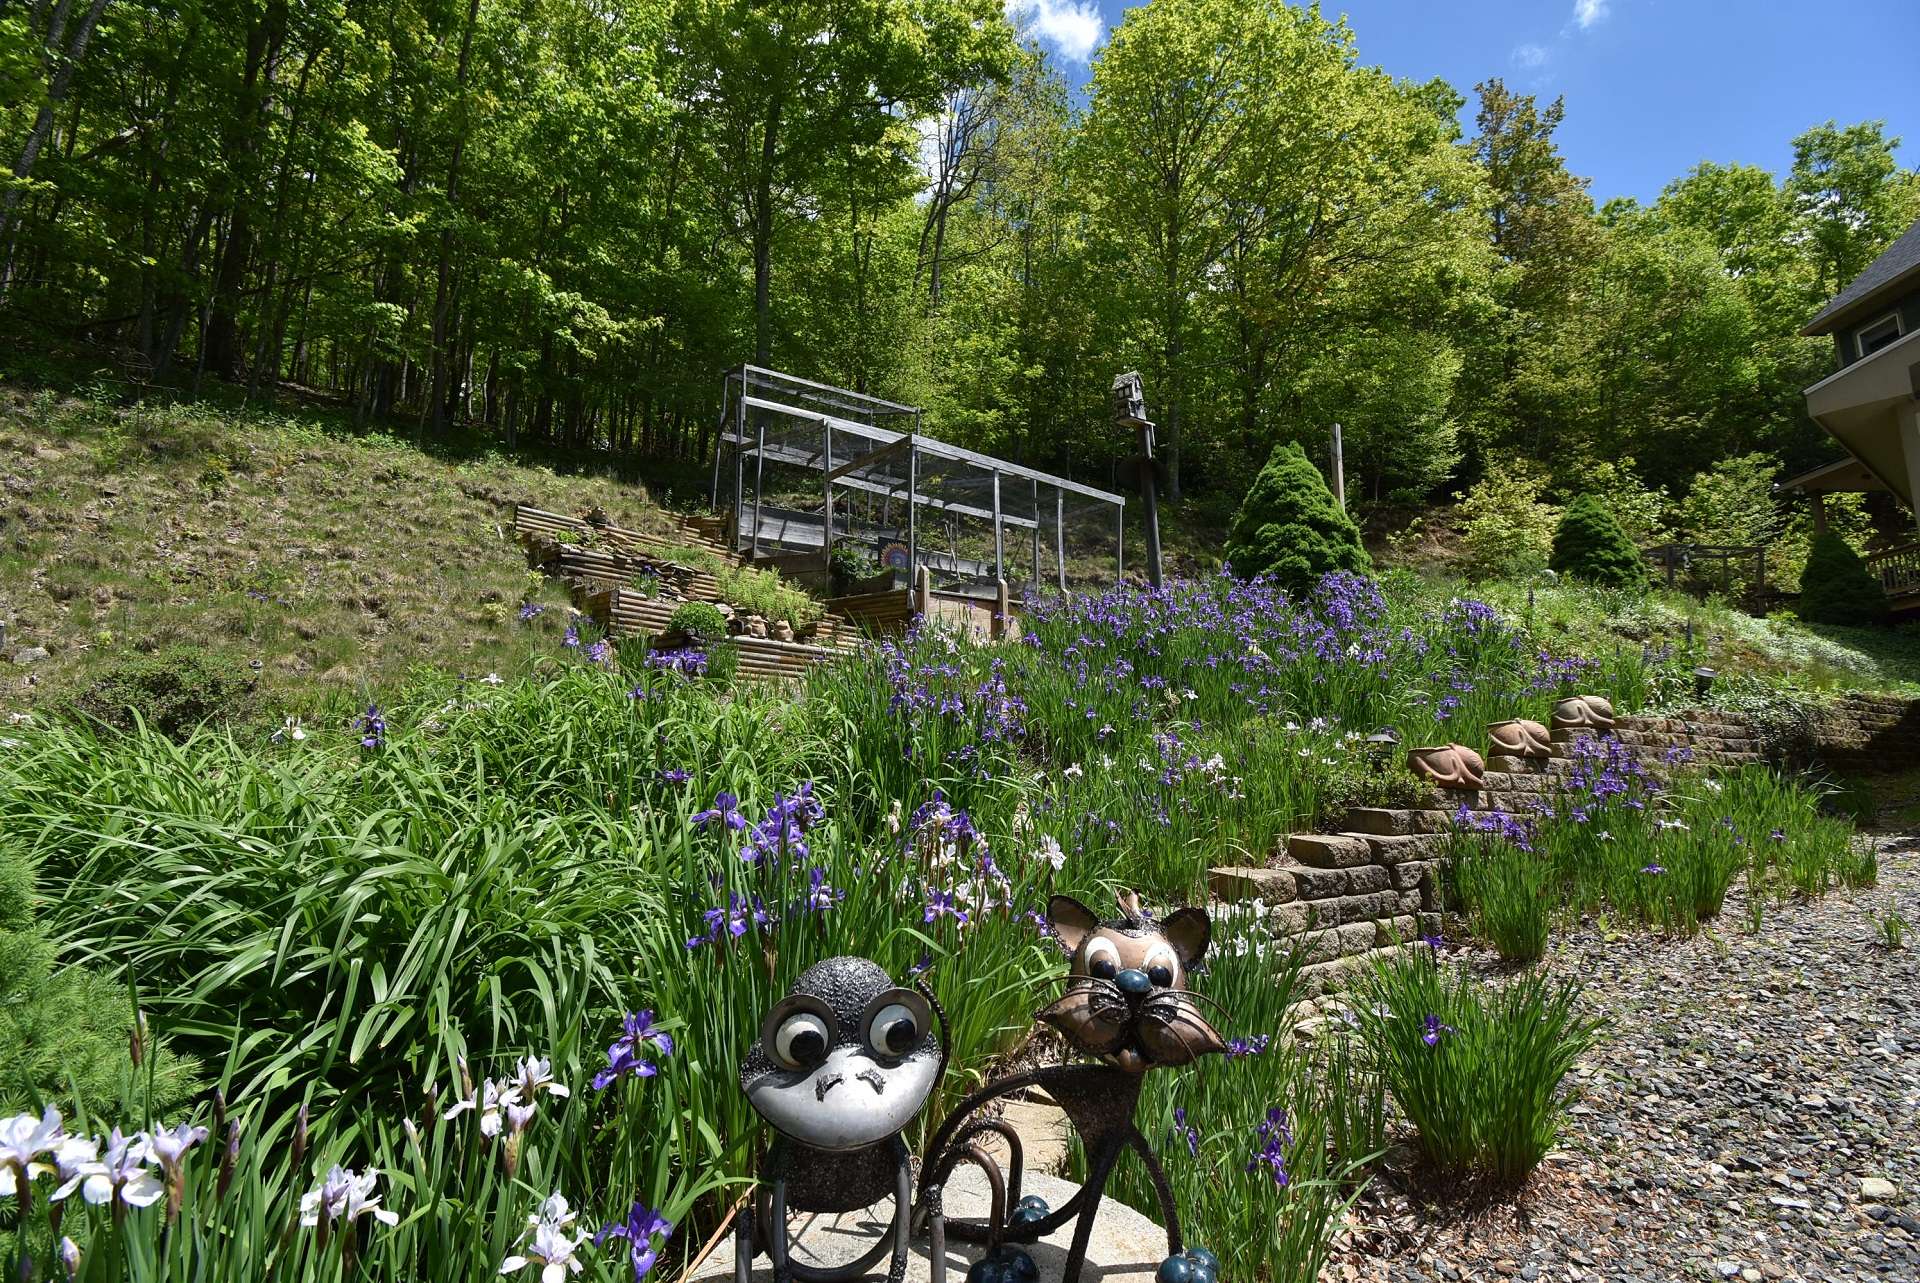 You will enjoy many years of beautifully planted perennials, annuls, and shrubbery providing blooms and color throughout the four seasons in the NC Mountains.